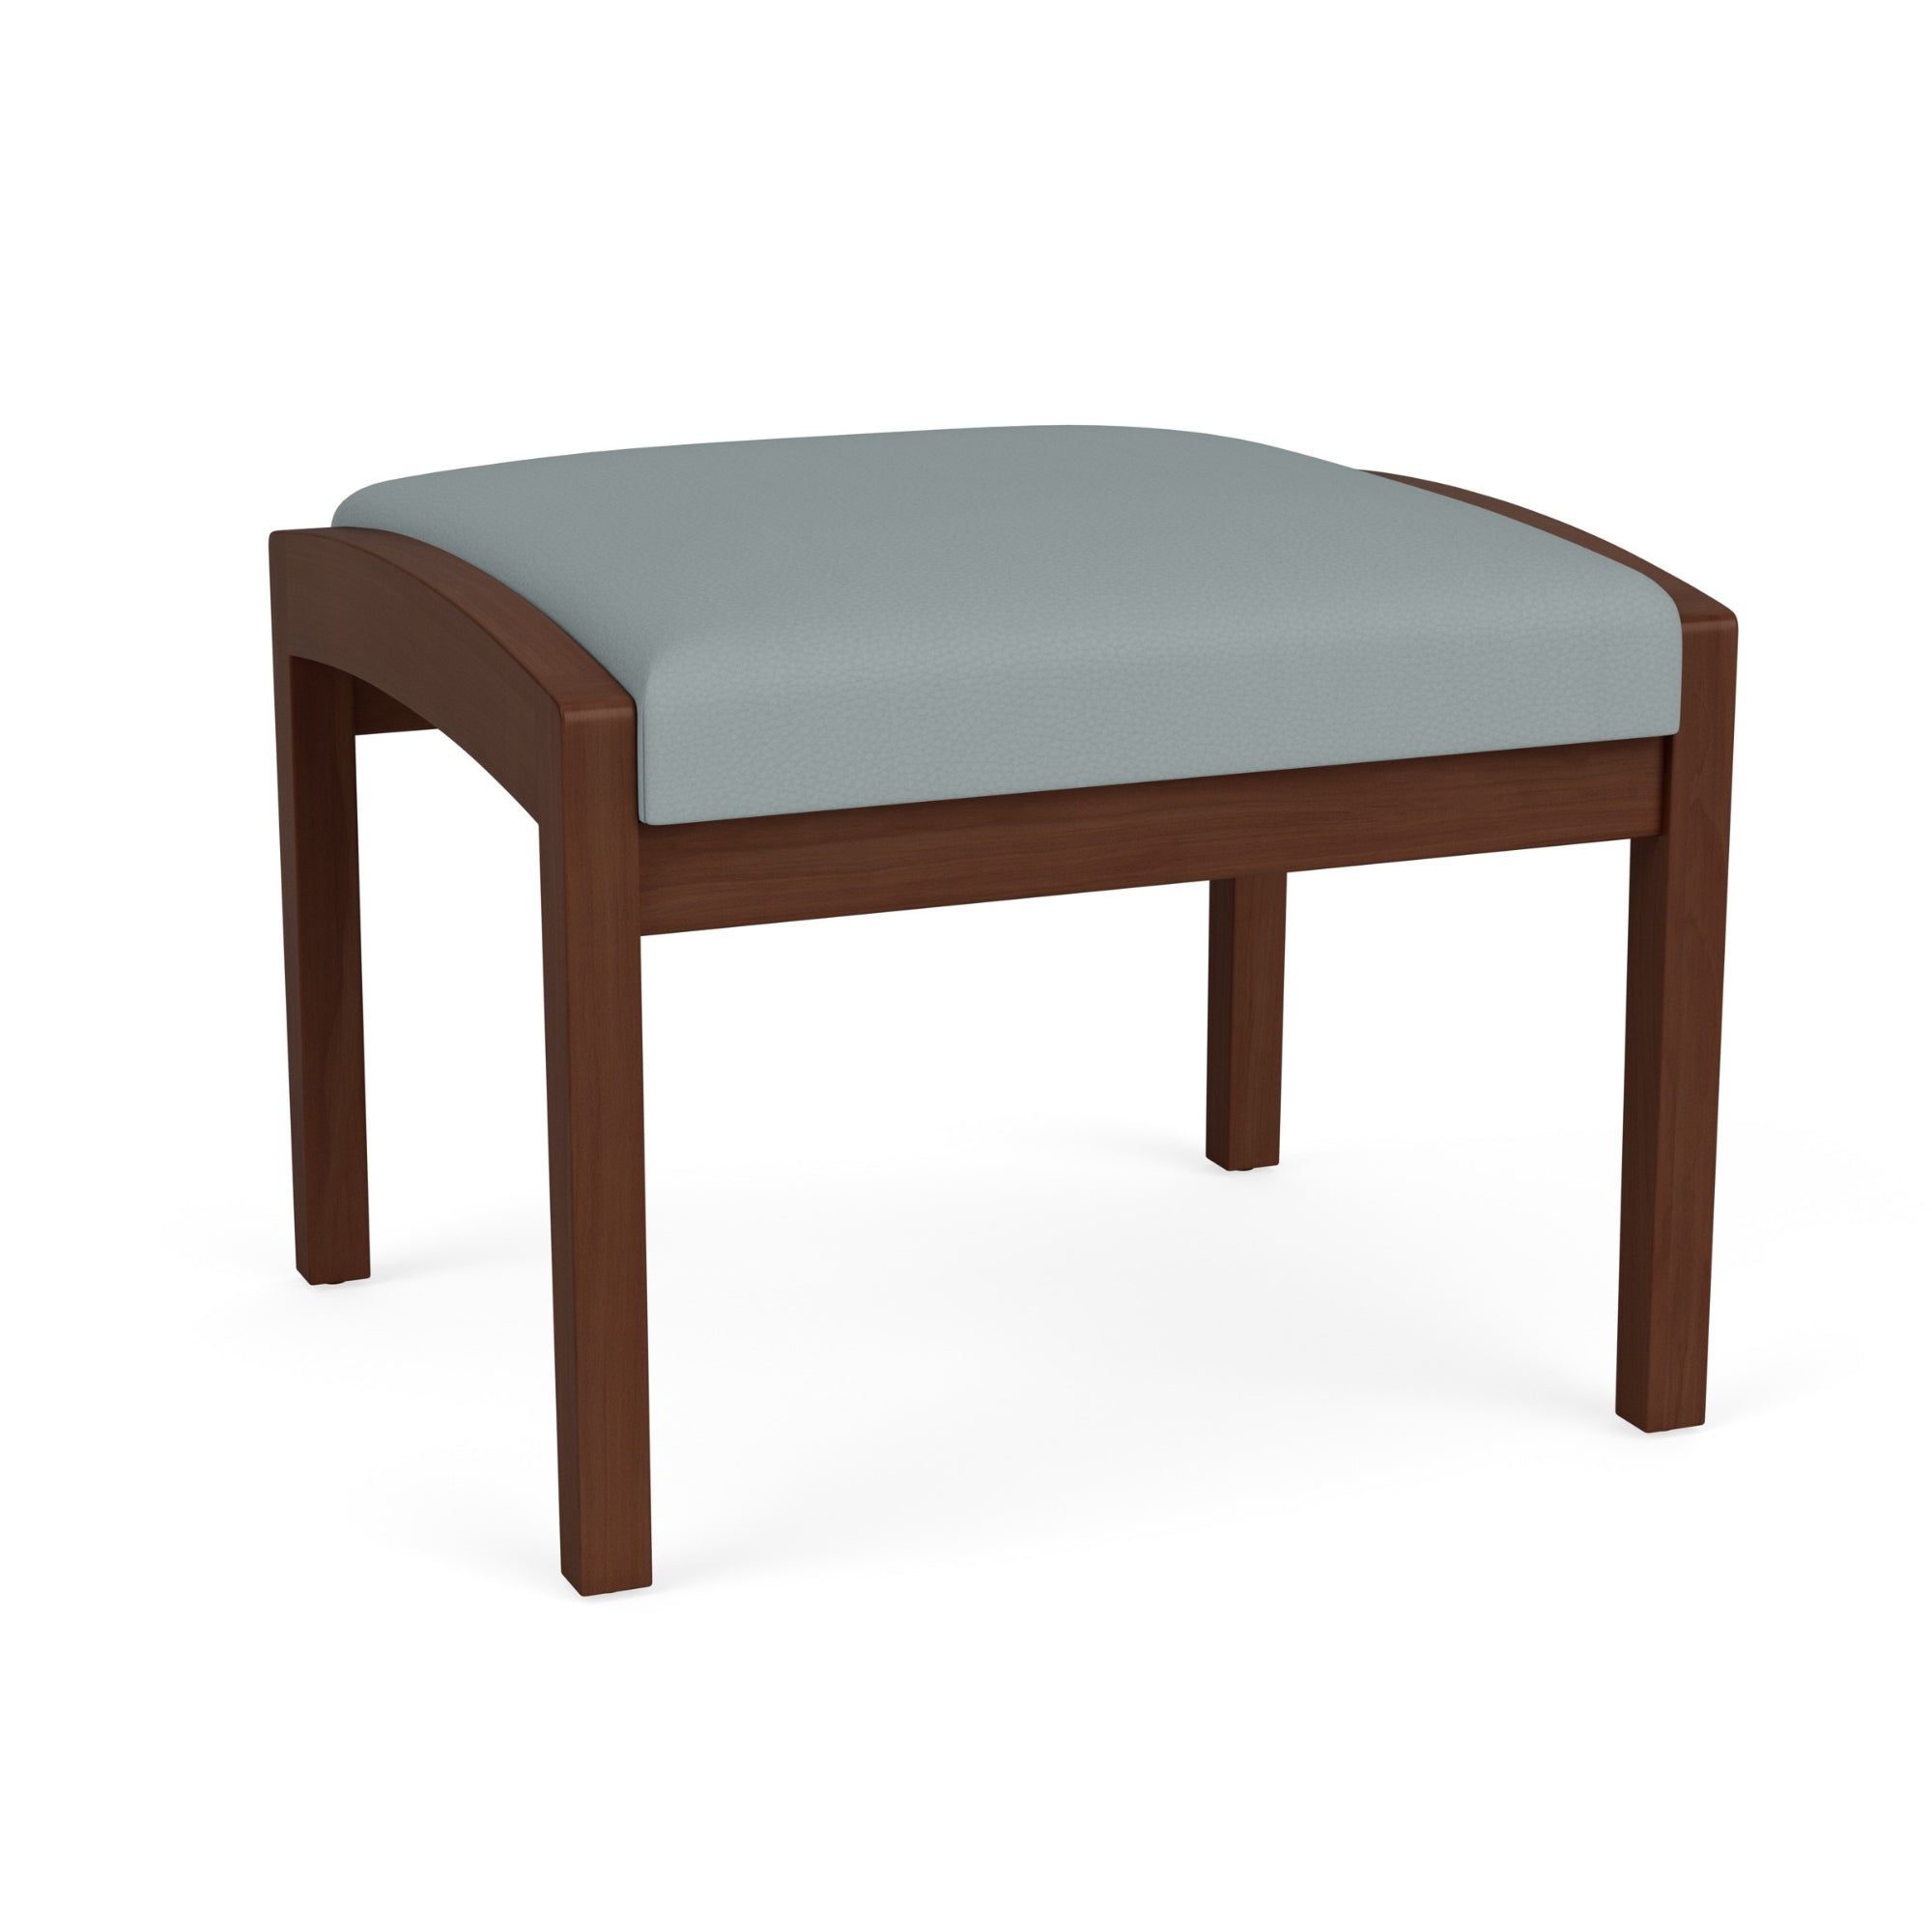 Lenox Wood Collection Reception Seating, 1 Seat Bench, Healthcare Vinyl Upholstery, FREE SHIPPING